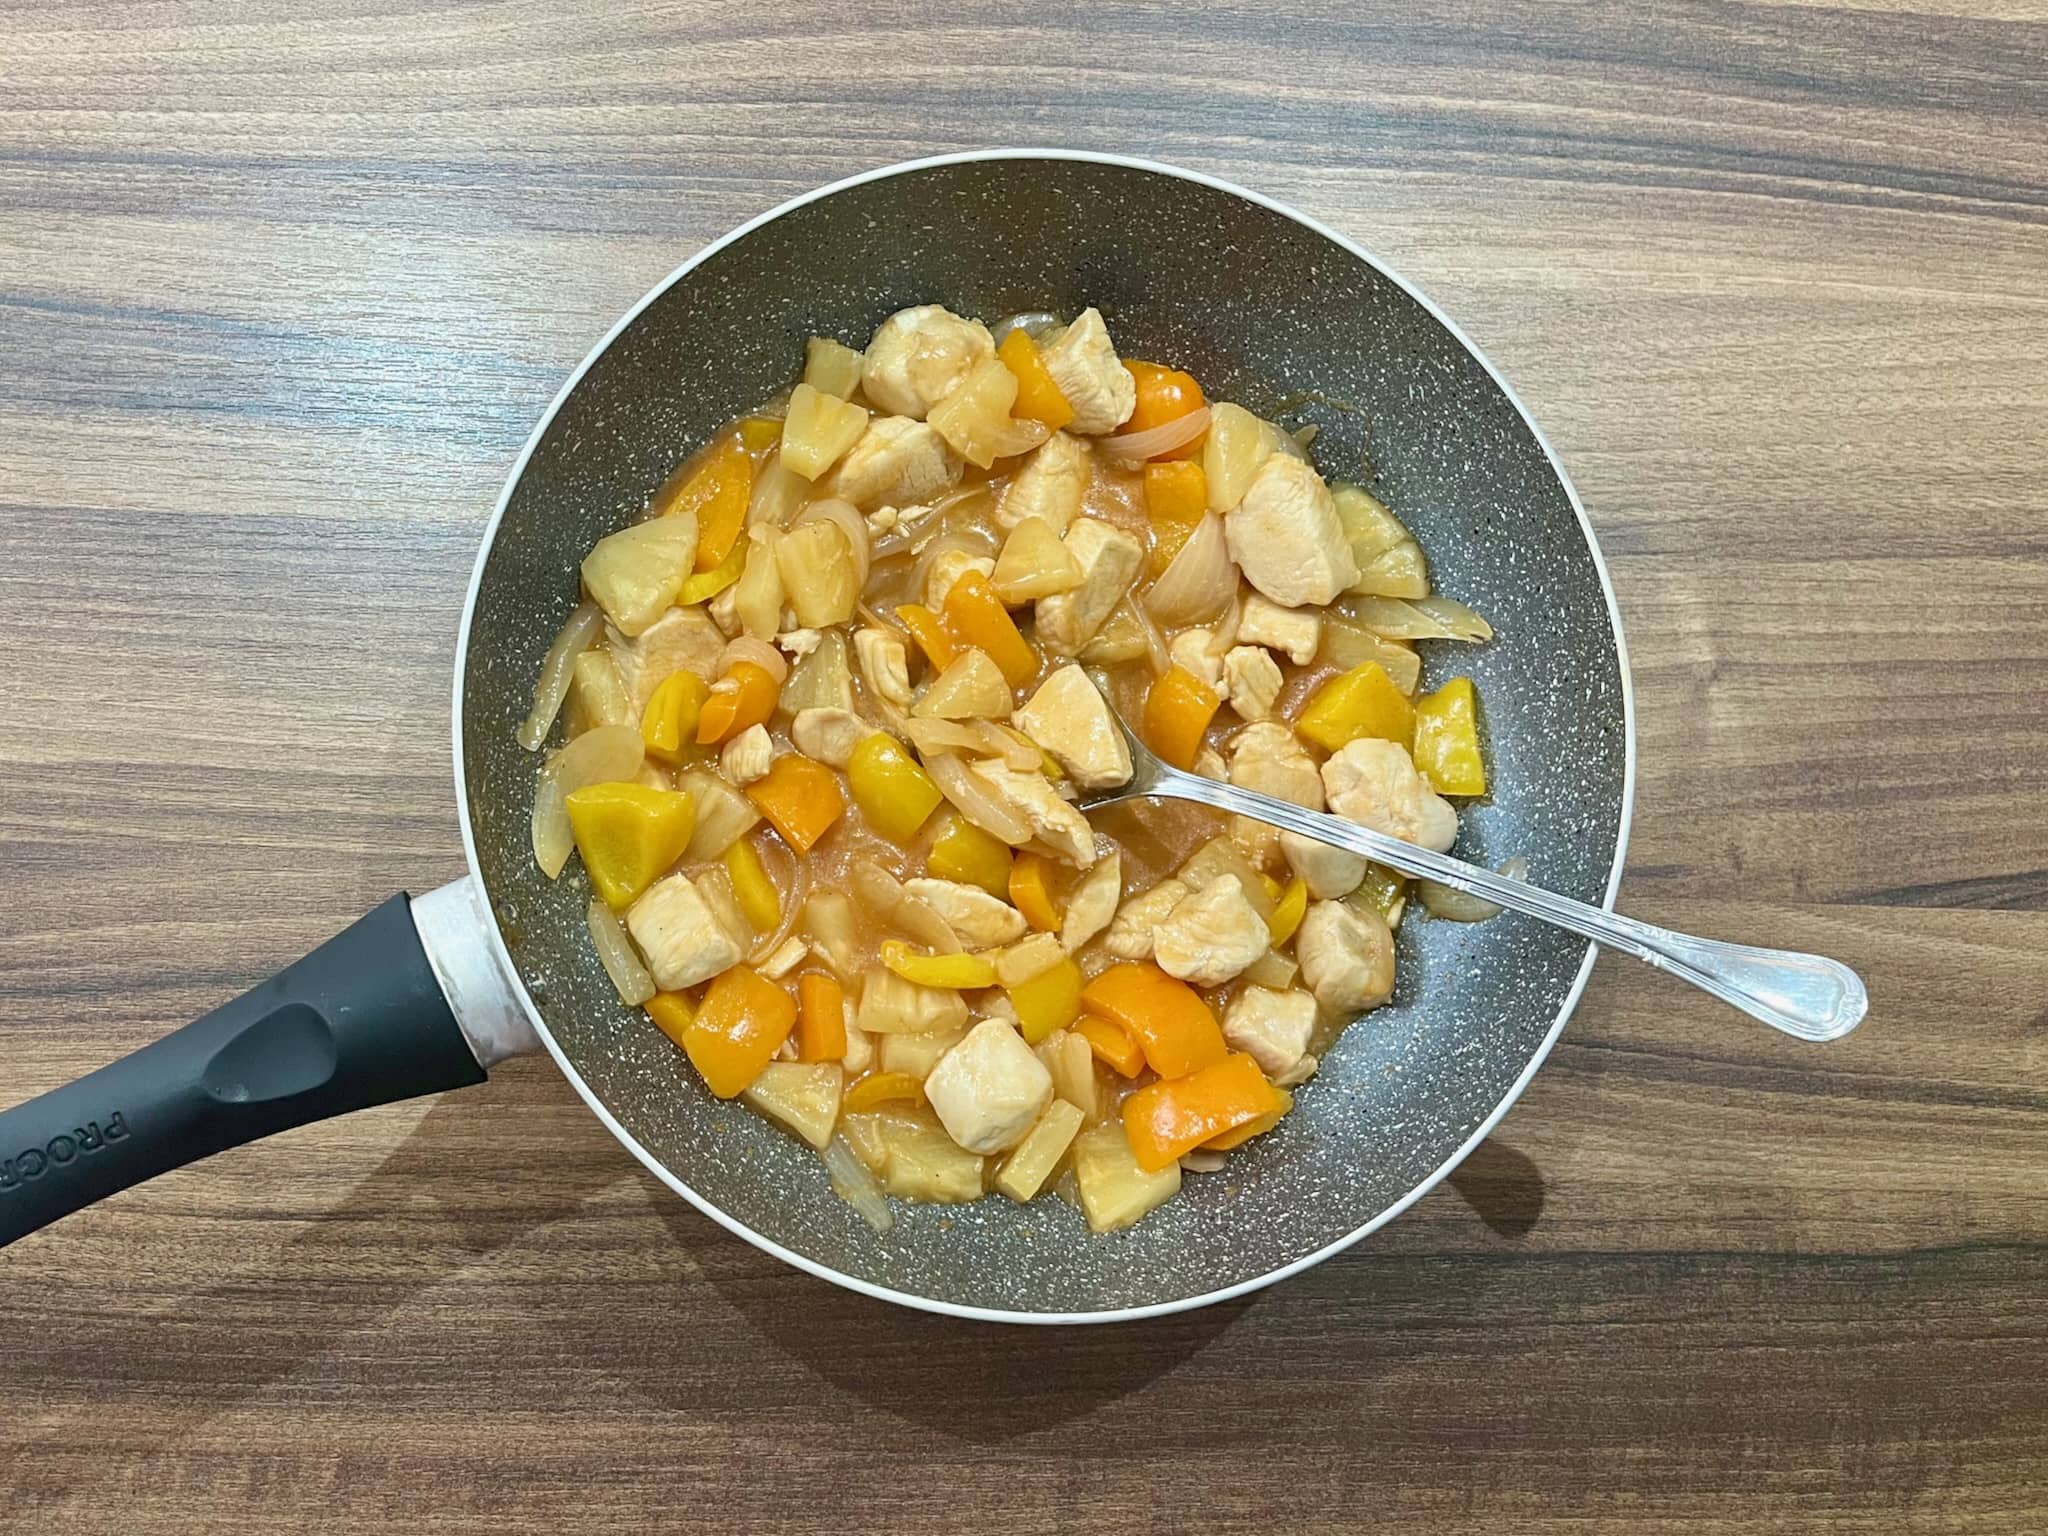 Sweet &amp; Sour Chicken in a pan getting final stir before serving